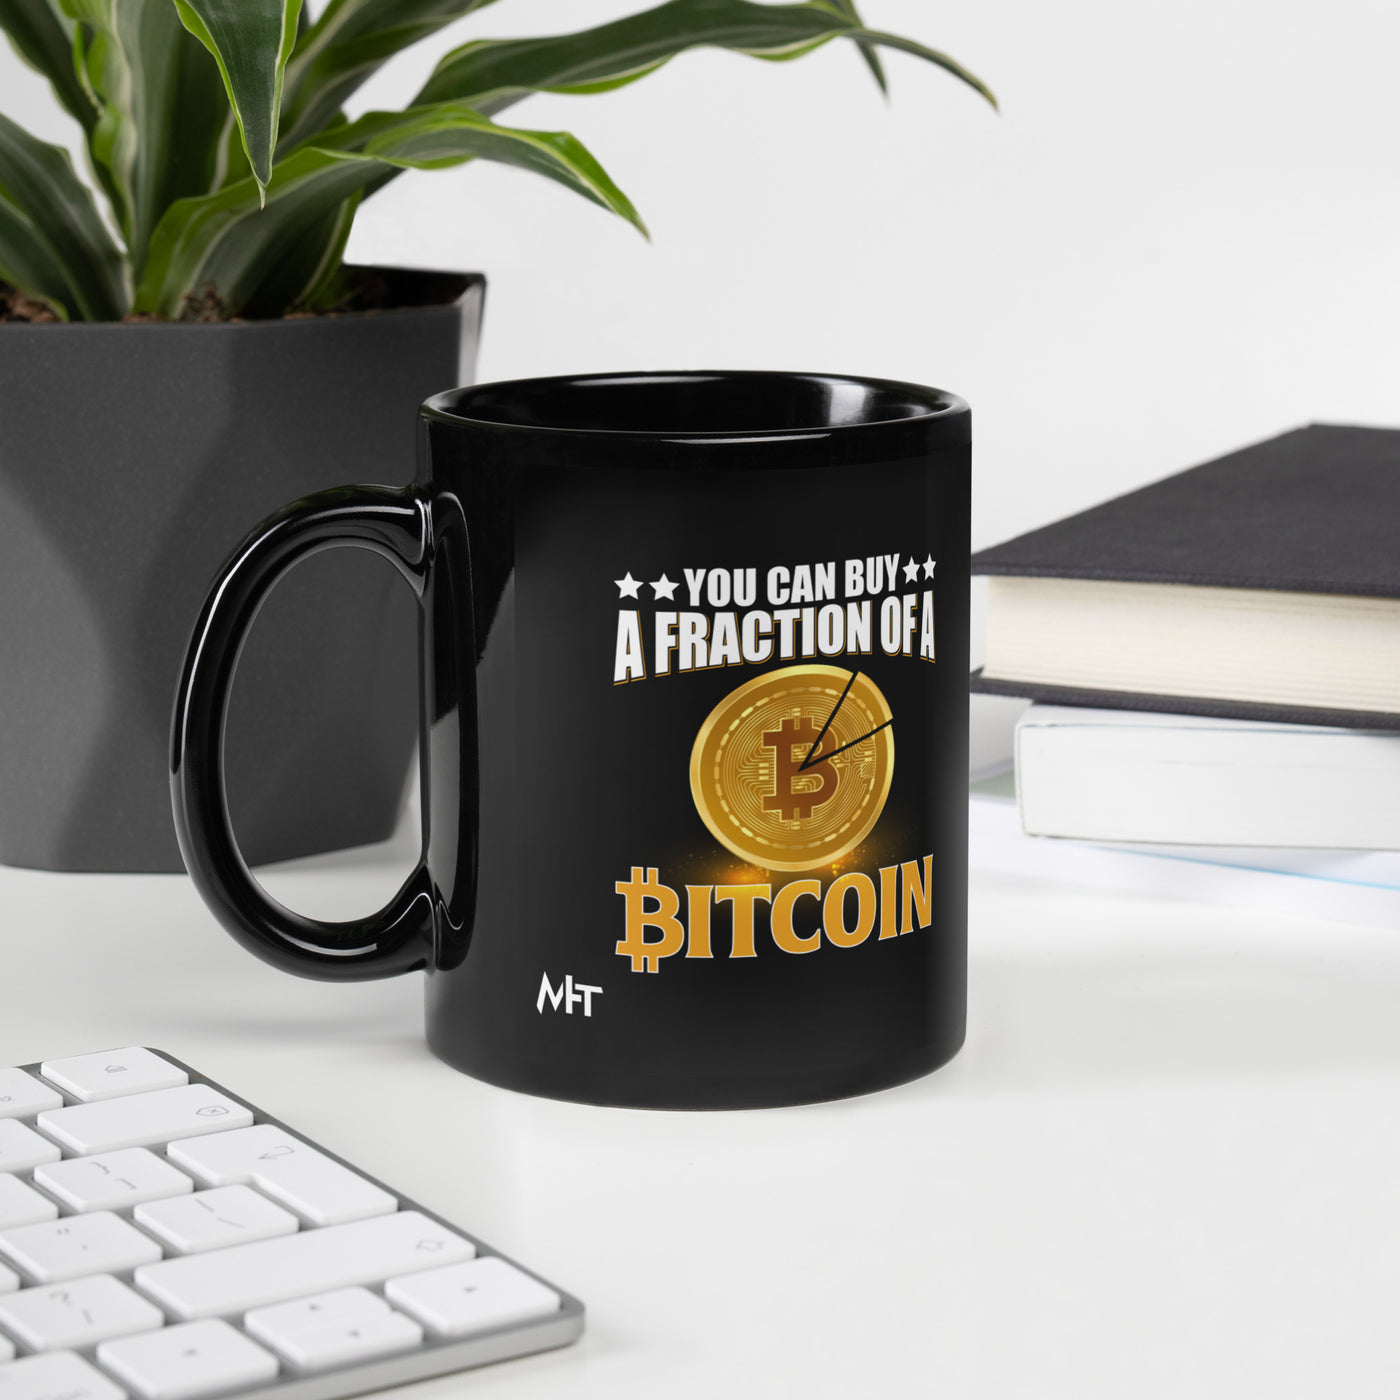 You can Buy a Fraction of a Bitcoin - Black Glossy Mug